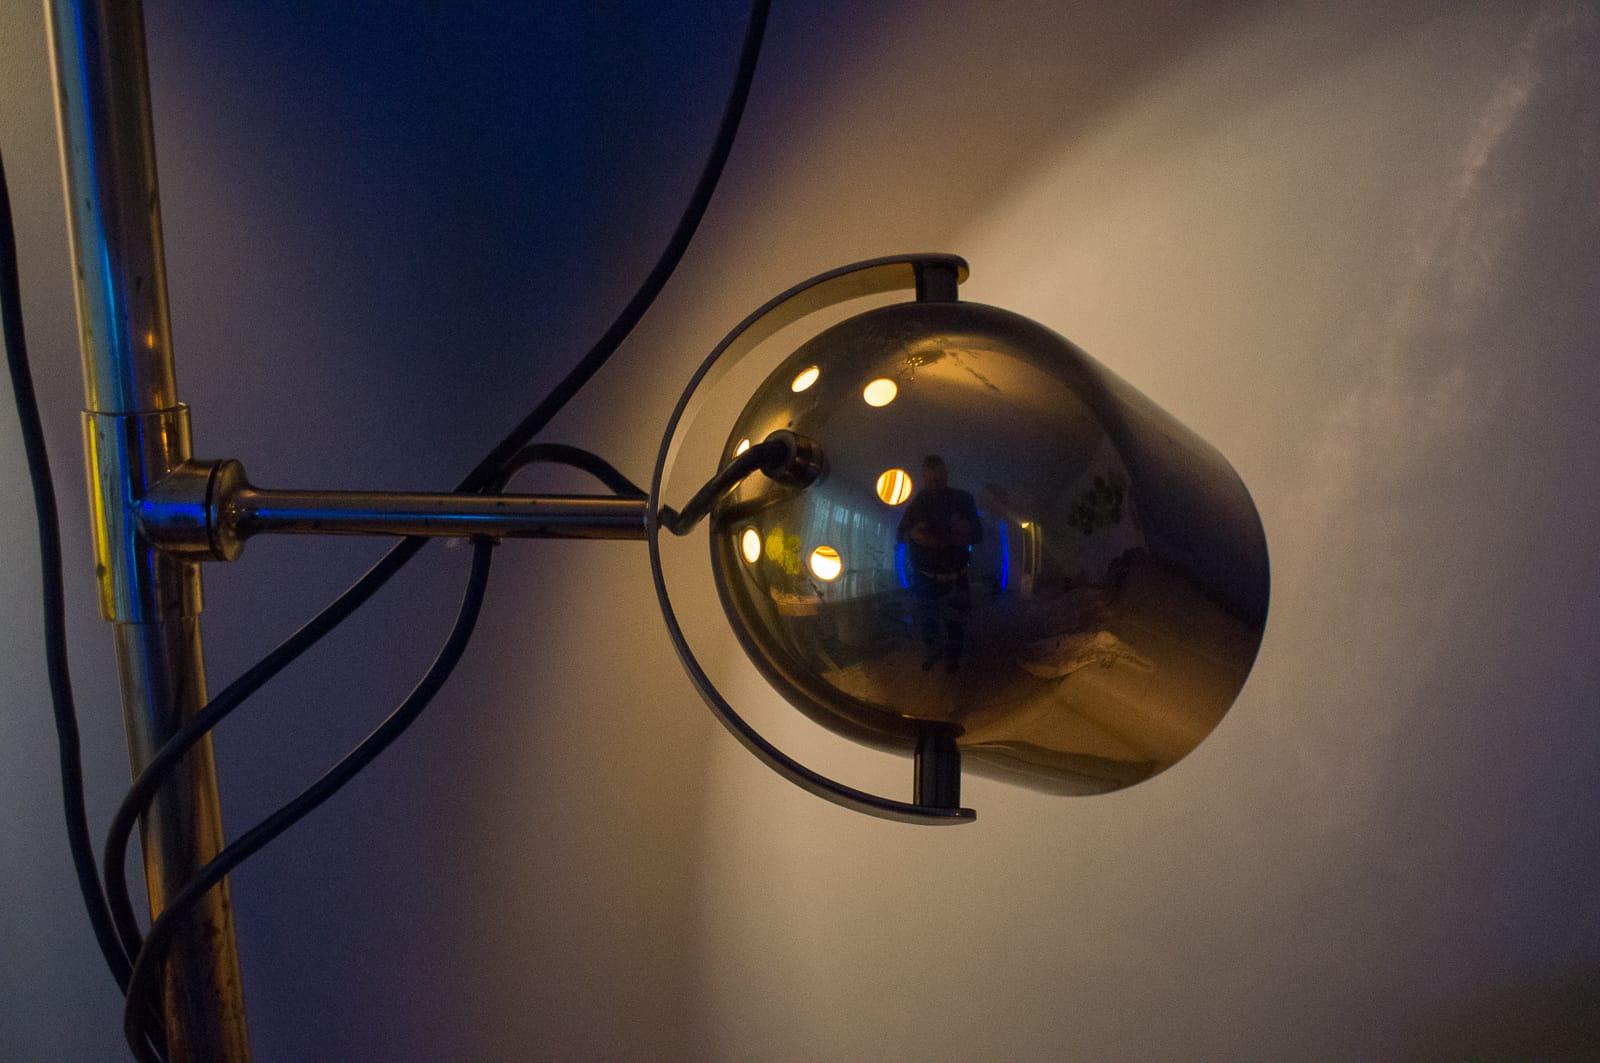 Extremly Rare Brass Tension Lamp from Florian Schulz, Model S 100 1